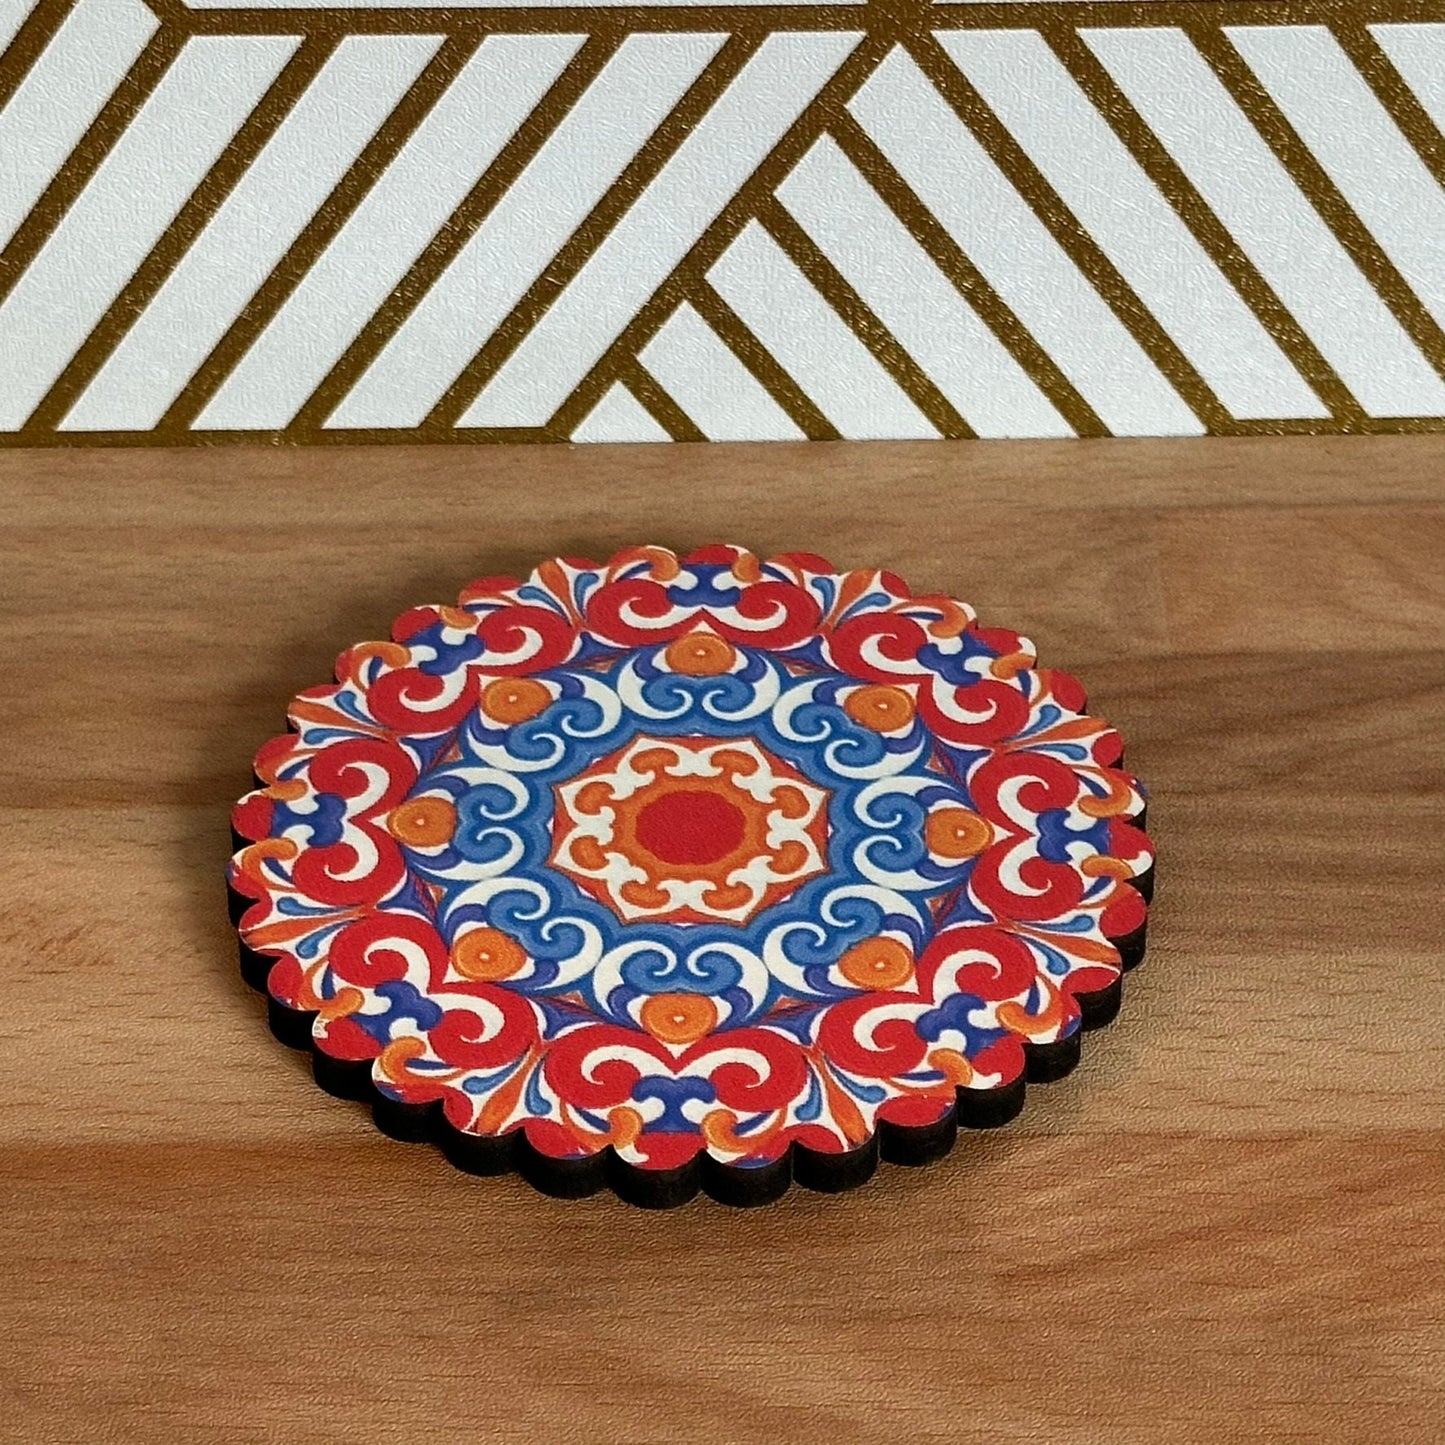 6 Pack Turkish Wooden Coaster Set with Holder - Bright Red, Orange, Blue Floral Mandala -- Made in Turkey -- Quick Ship